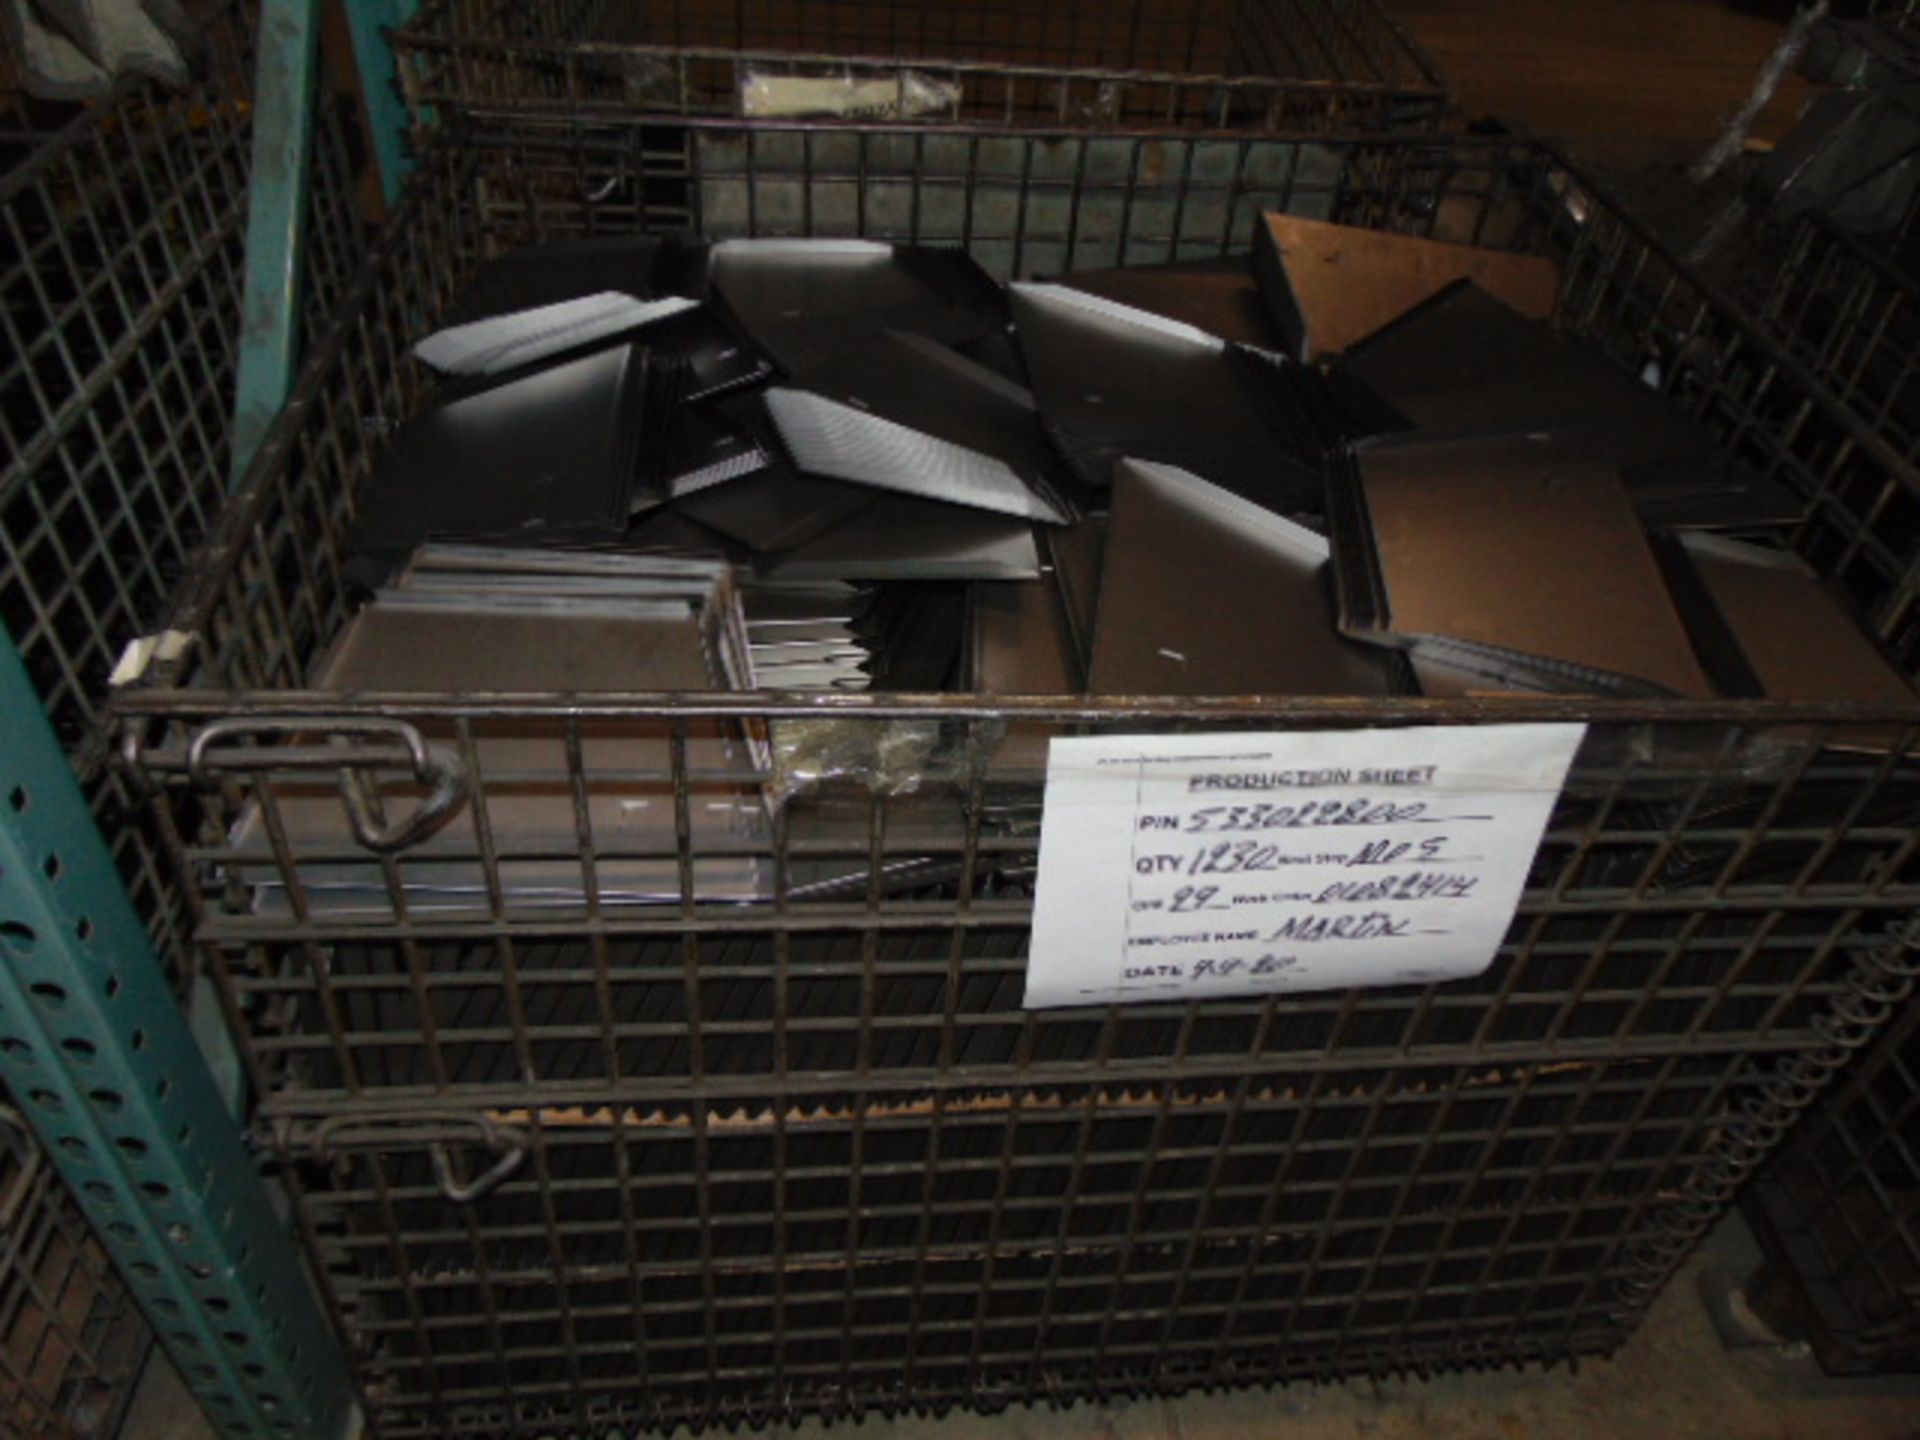 LOT CONSISTING OF: assorted steel in process parts, wire baskets & cardboard (no dies or racks) ( - Image 32 of 39